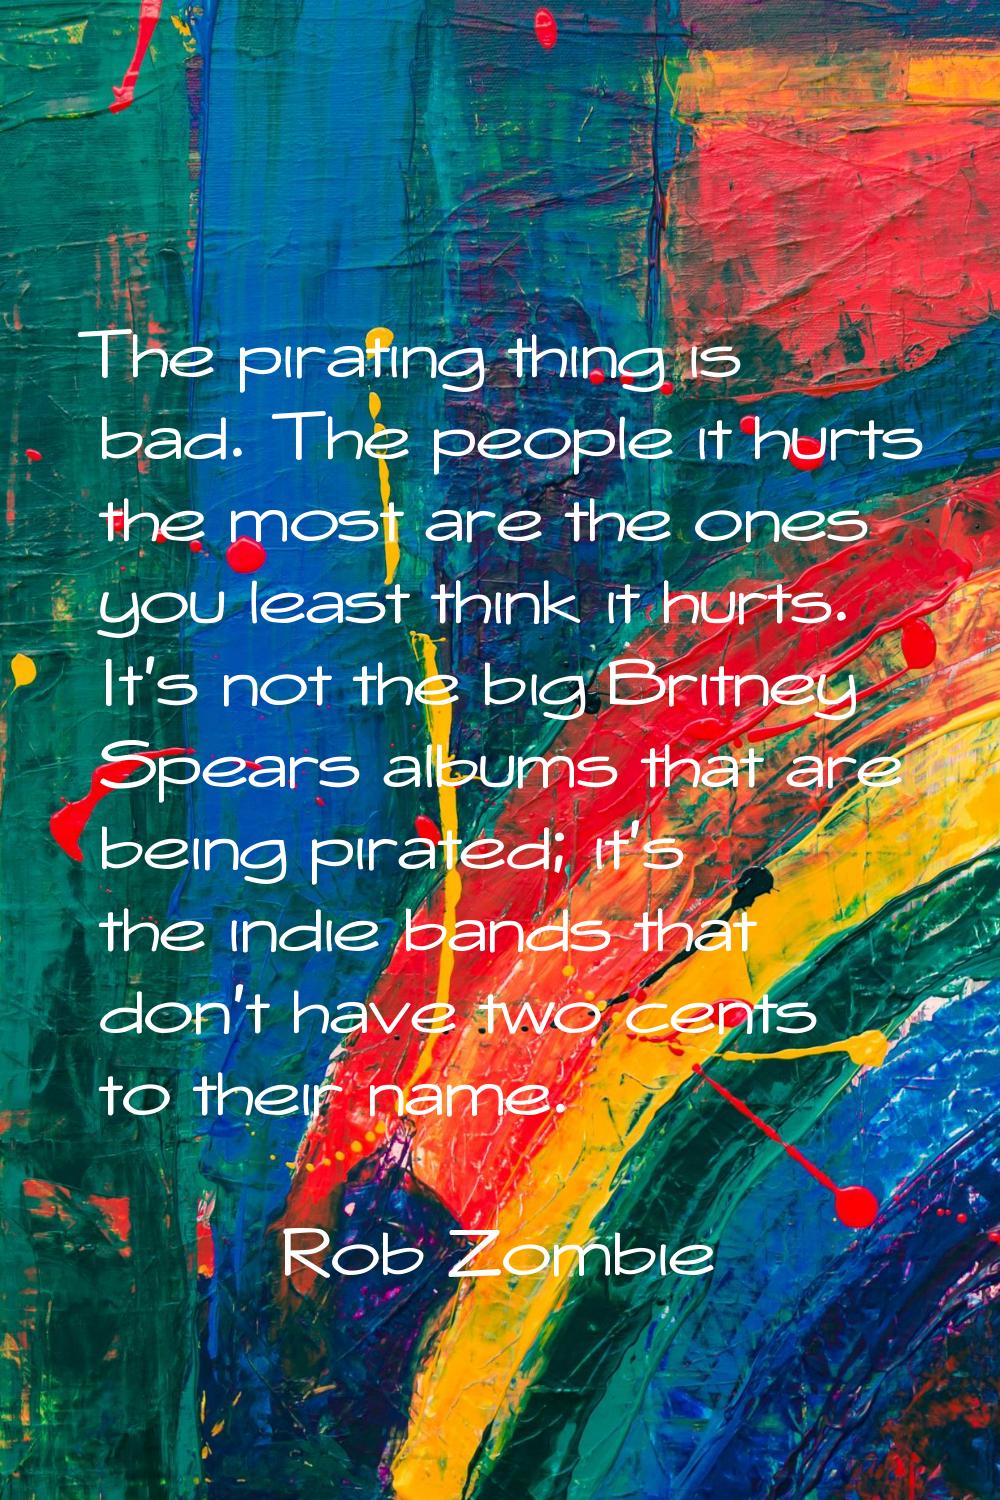 The pirating thing is bad. The people it hurts the most are the ones you least think it hurts. It's